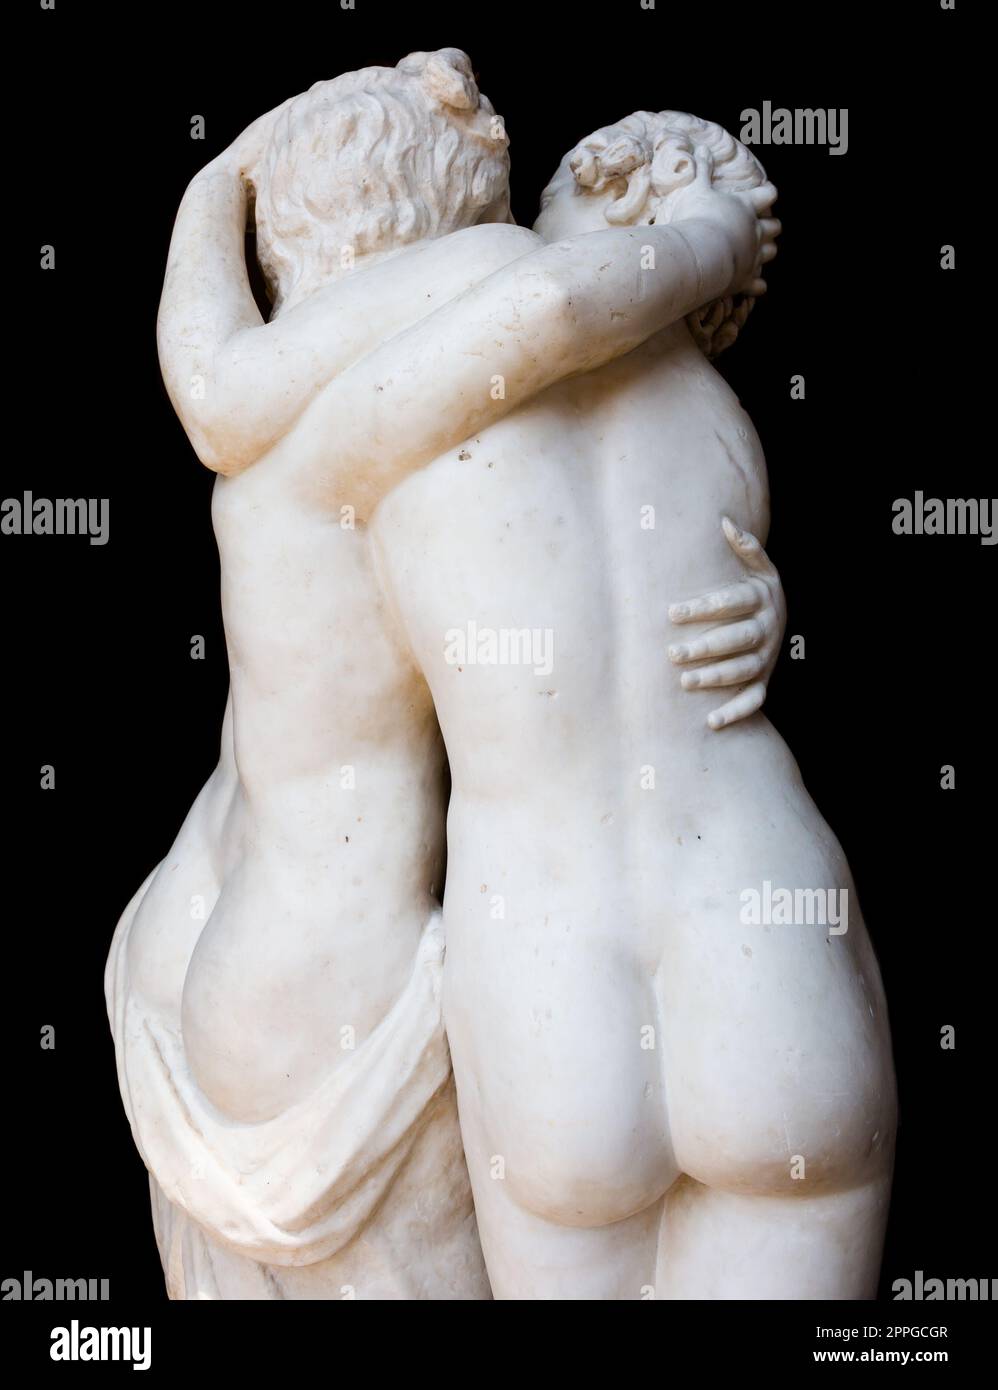 Togetherness emotion. Statue of two people embracing with passion Stock Photo